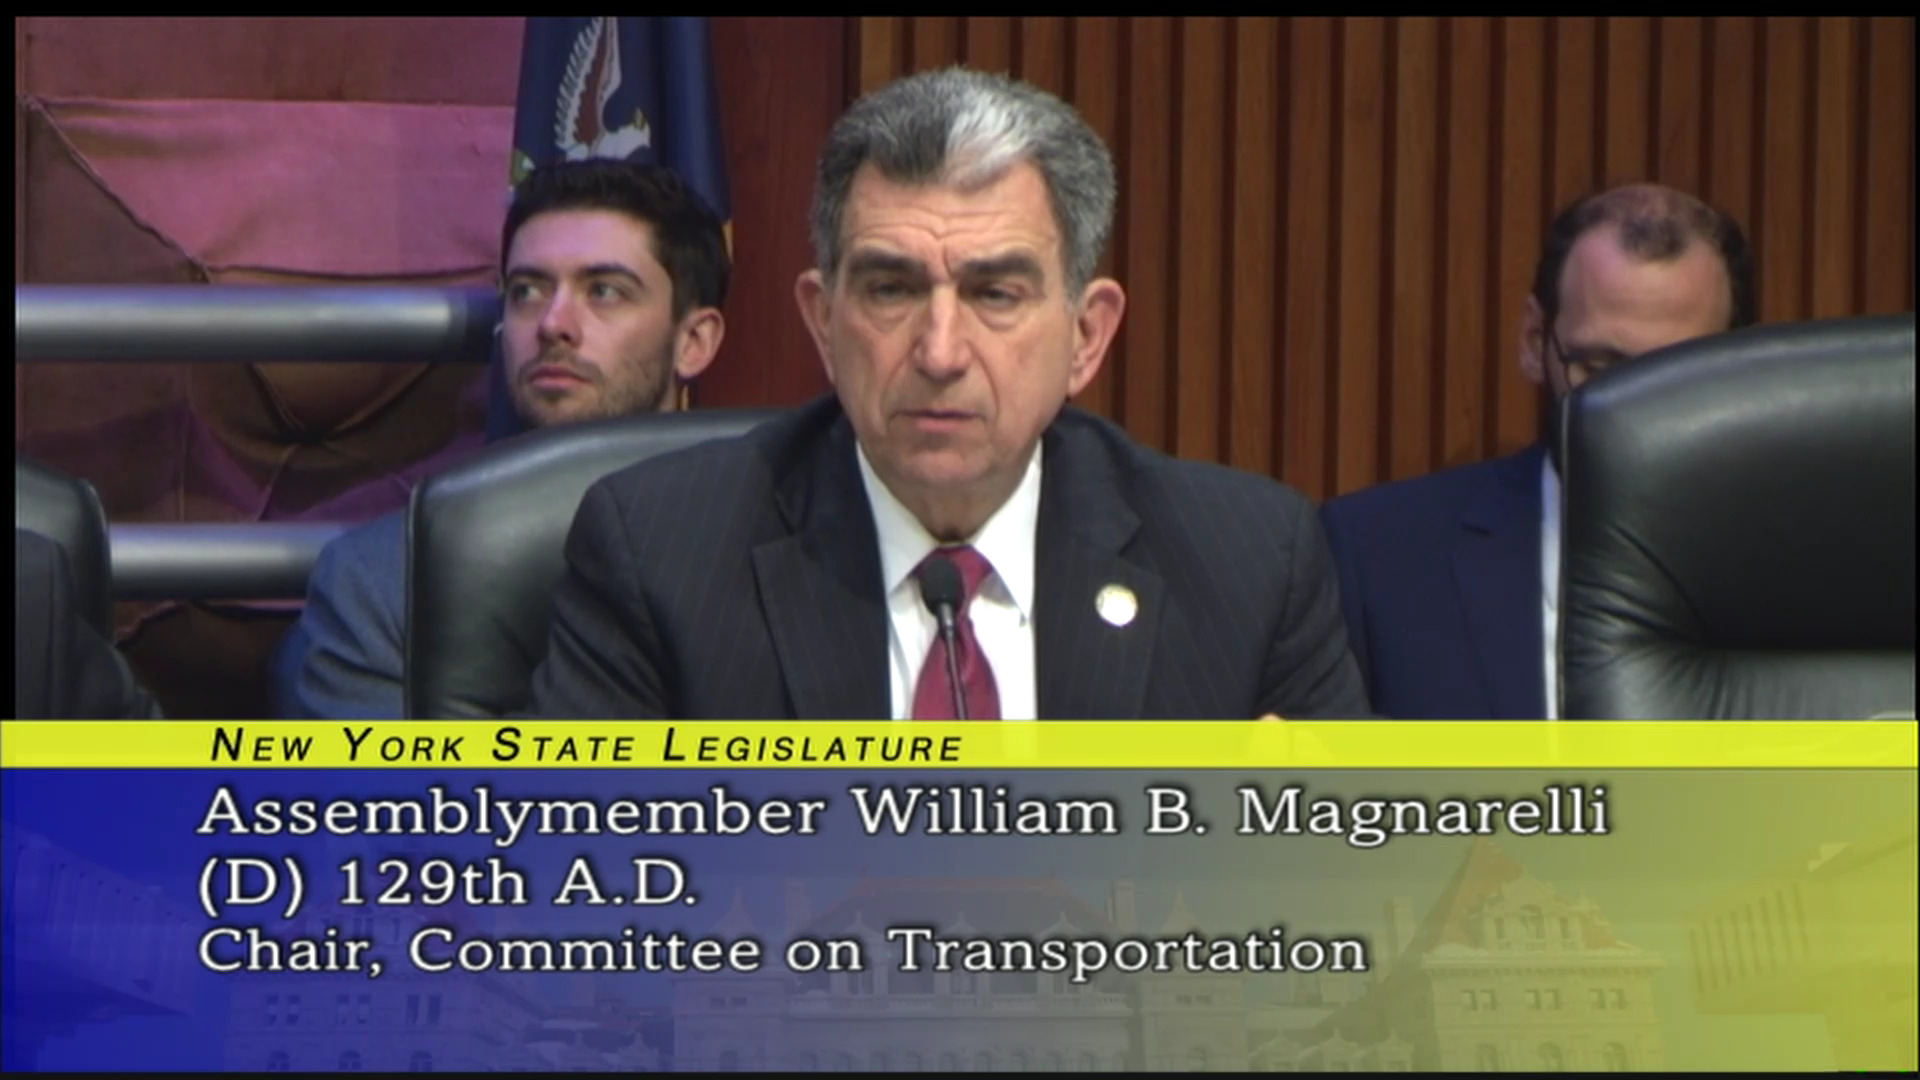 2020 Joint Budget Hearing on Transportation (1)